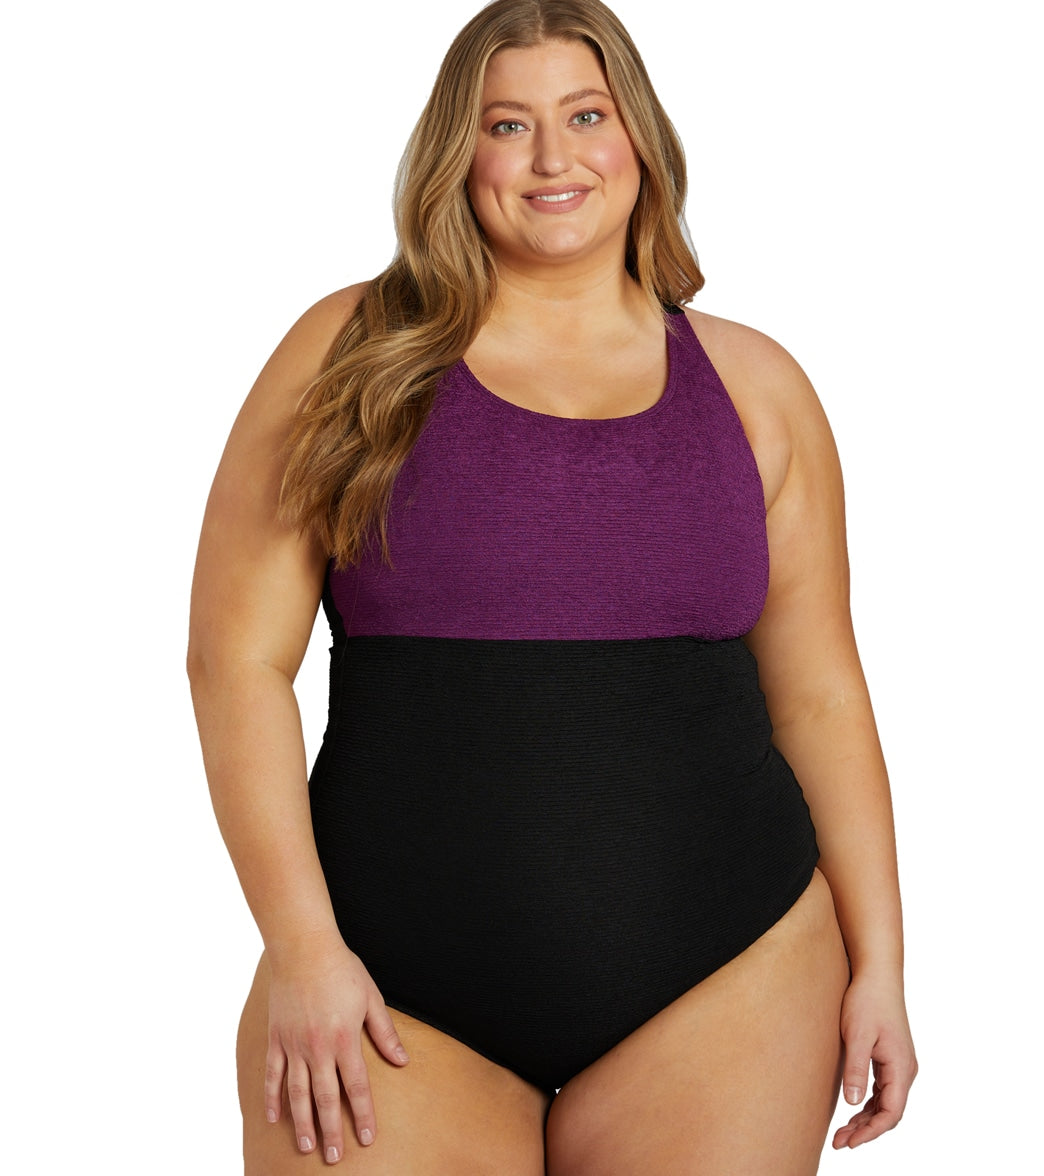 Women's One Piece Swimsuits